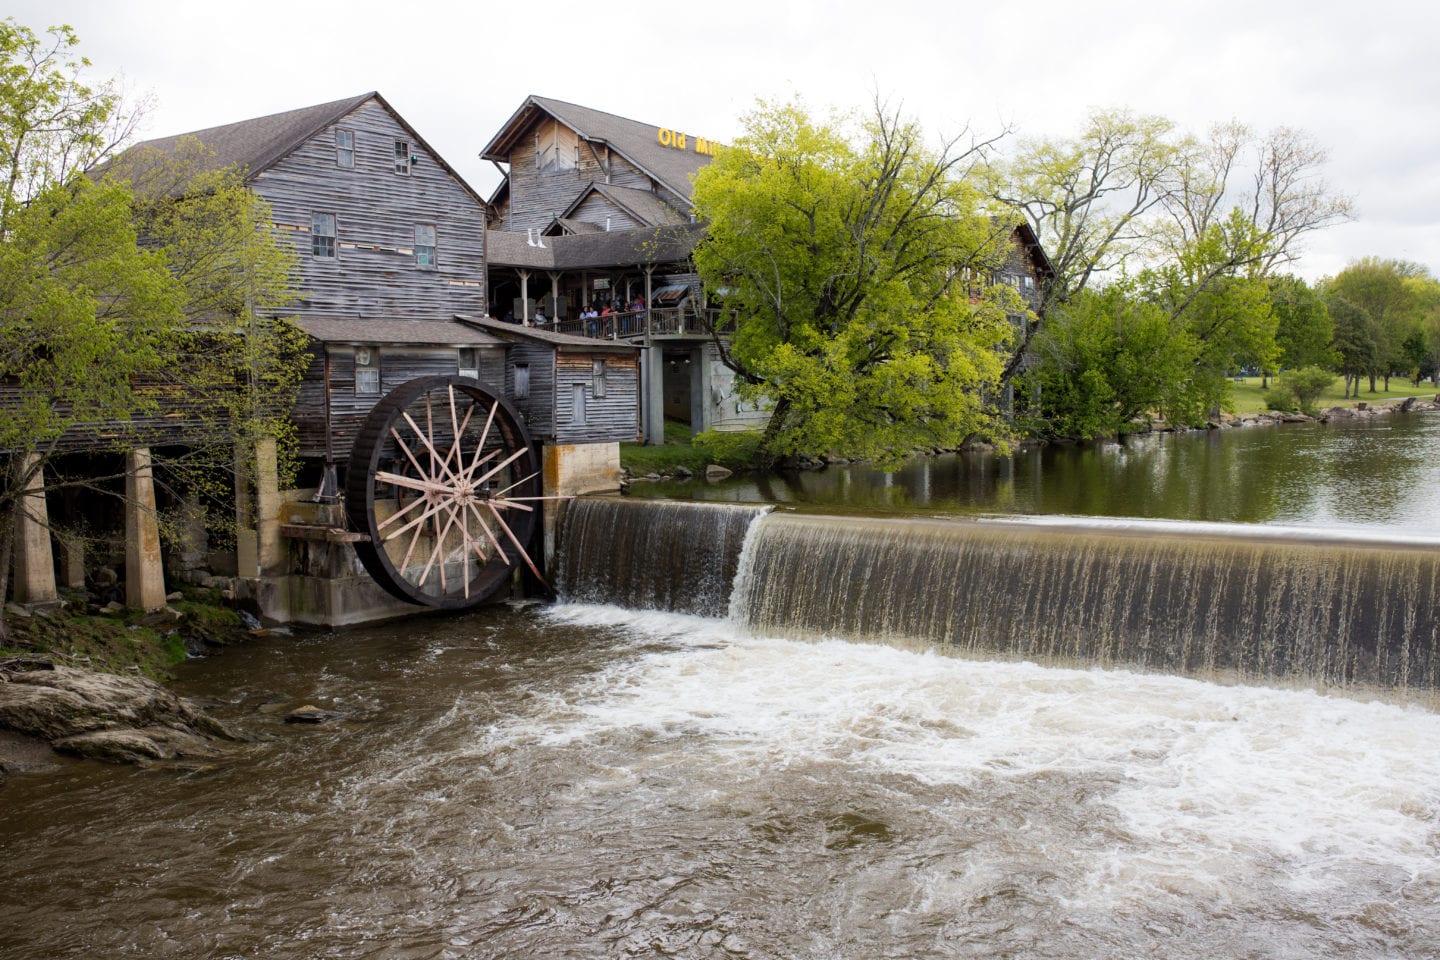 The Old Mill in Pigeon Forge